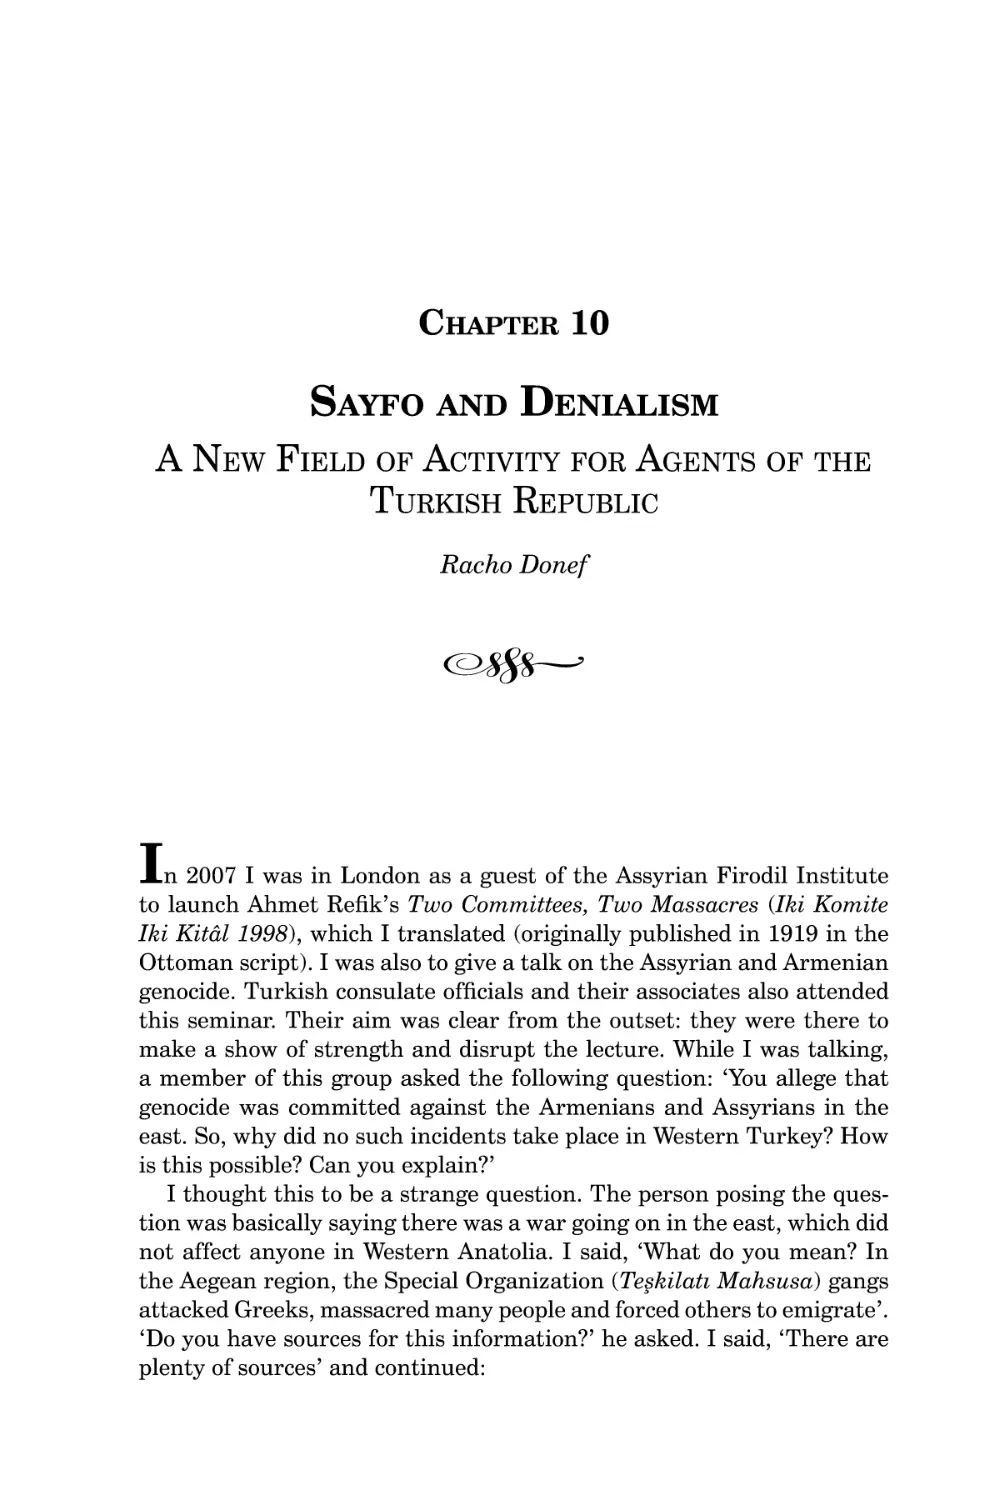 Chapter 10 Sayfo and Denialism